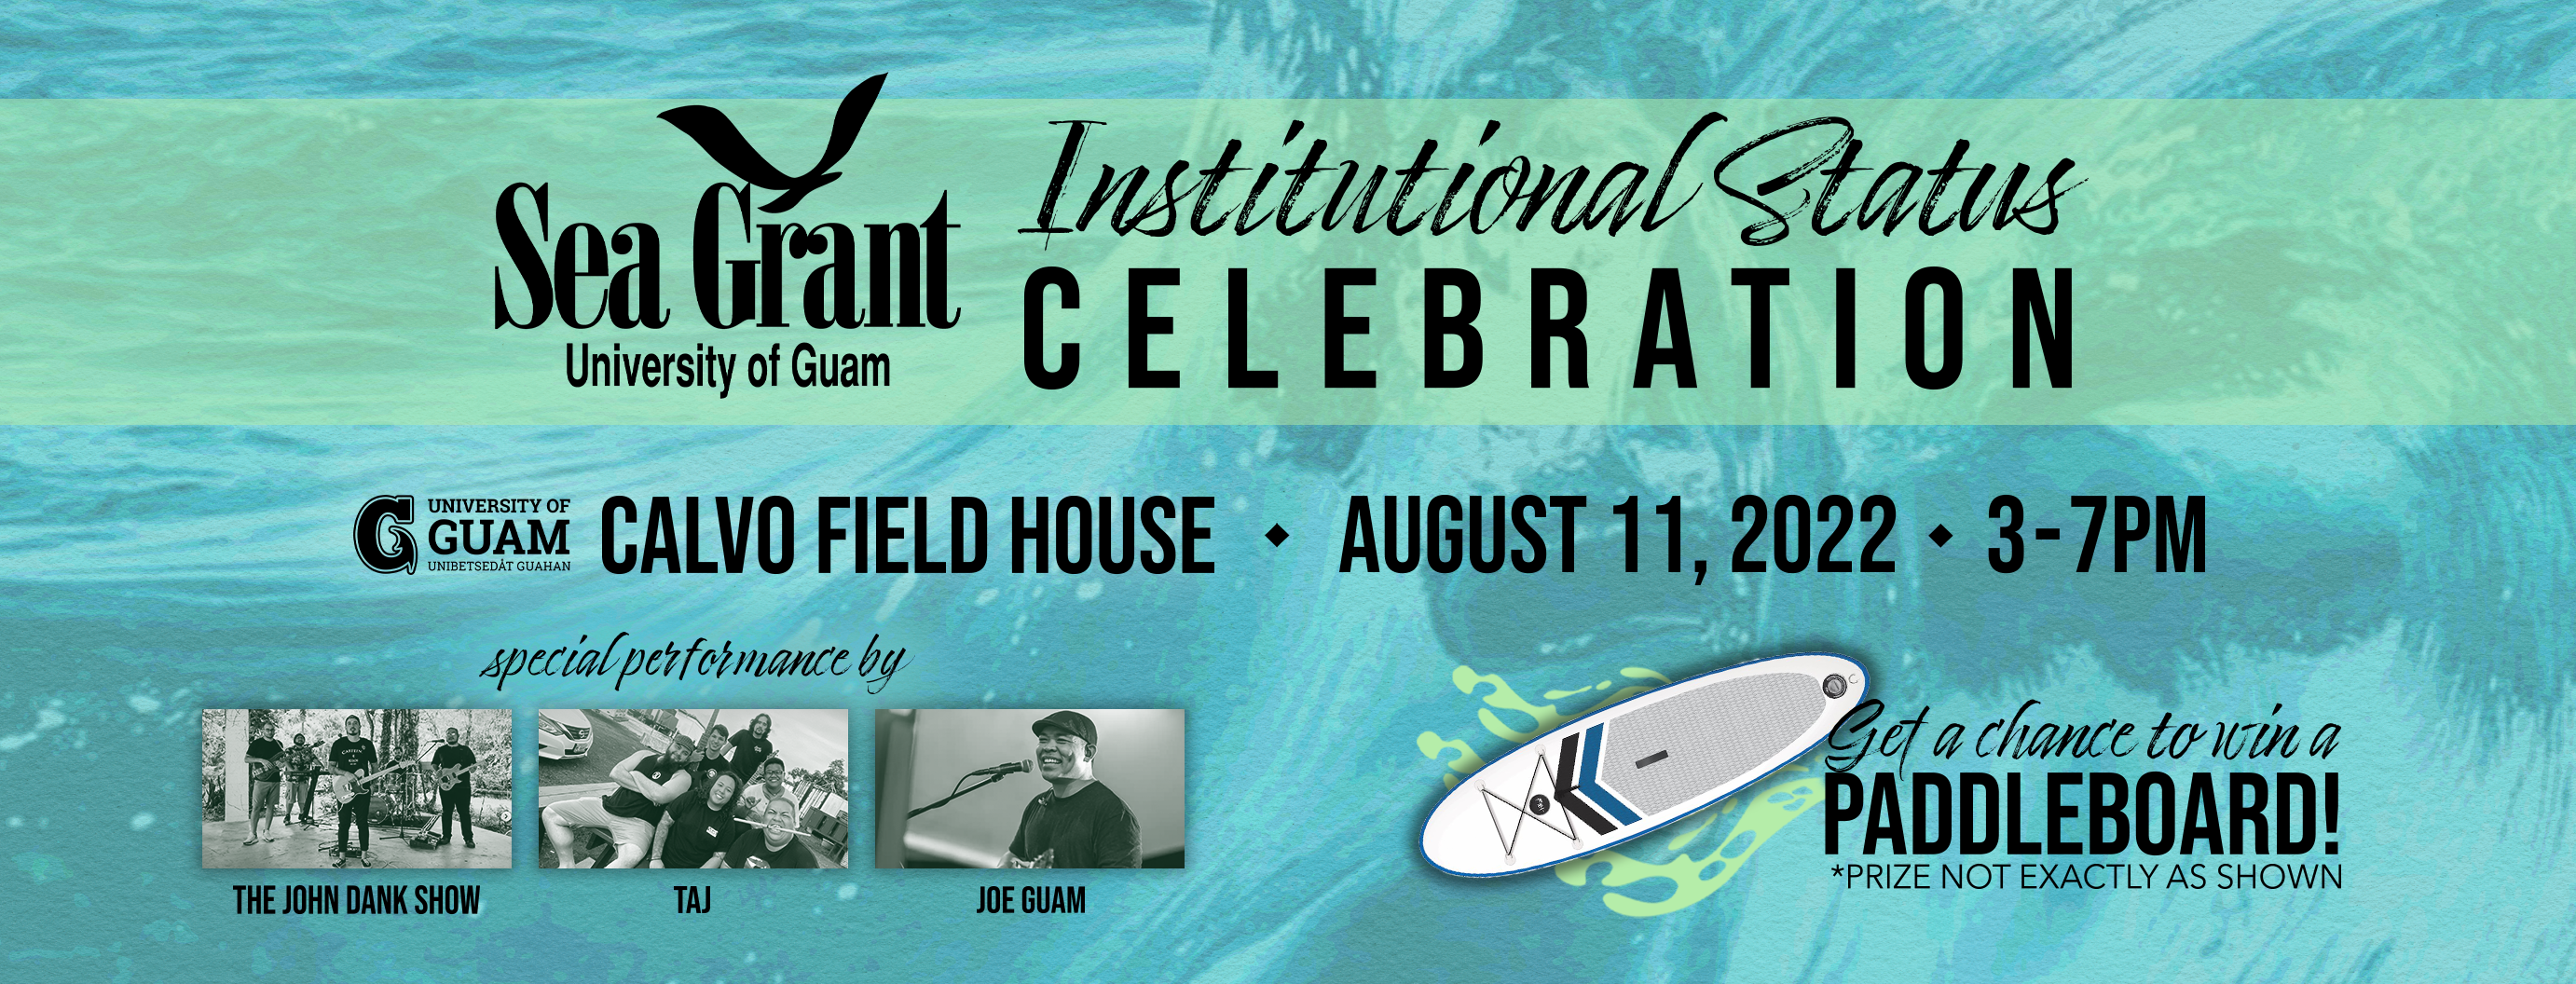 Sea Grant Institutional Status Celebration at the UOG Calvo Field House in August 11, 2022 from 3-7 p.m.